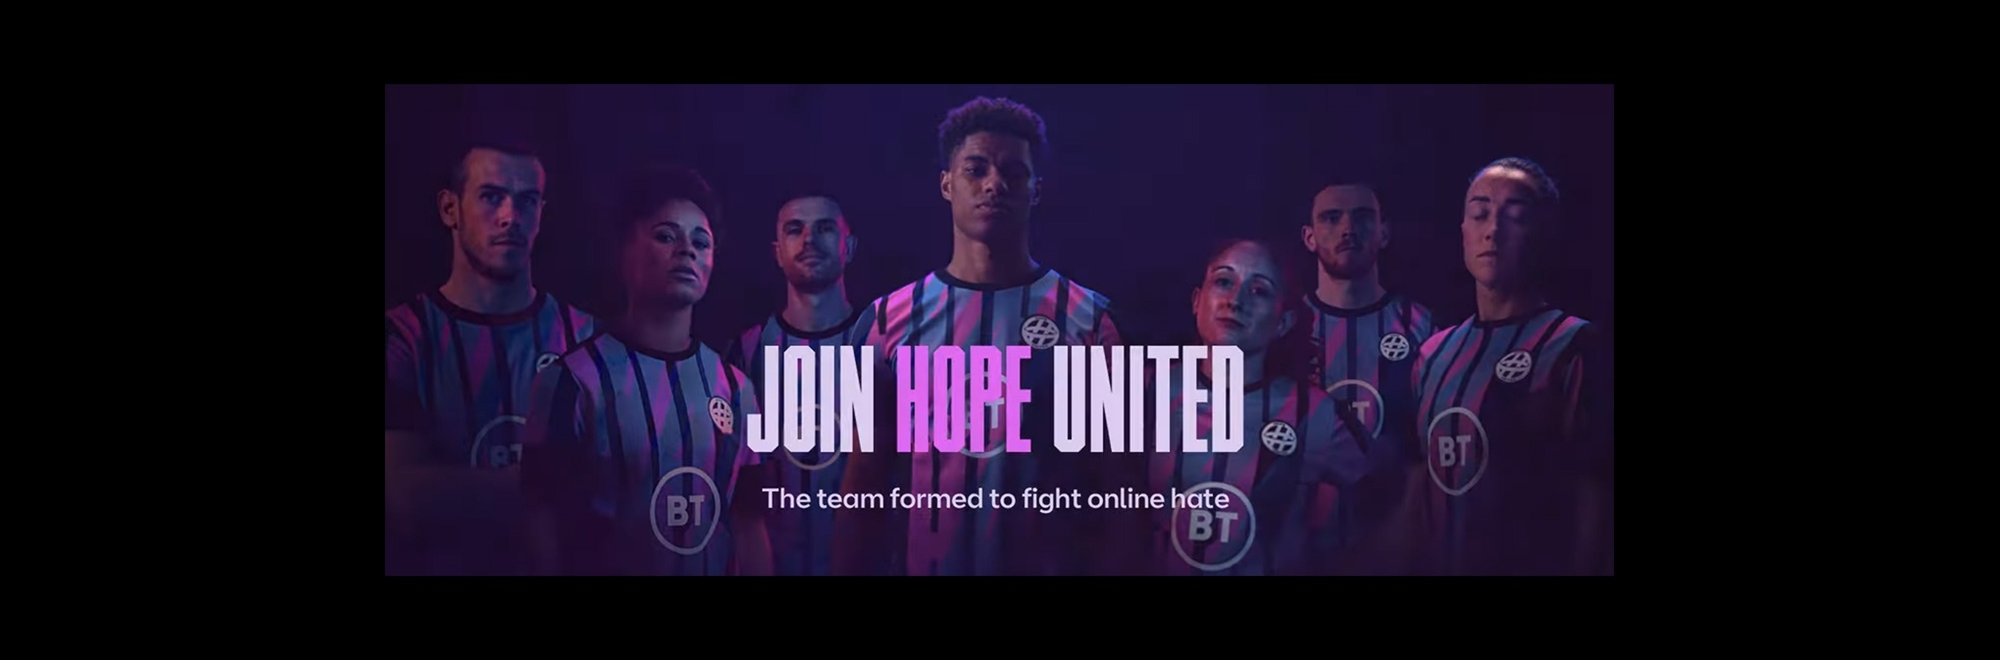 BT launches Hope United campaign to rally the nation and unite against online hate